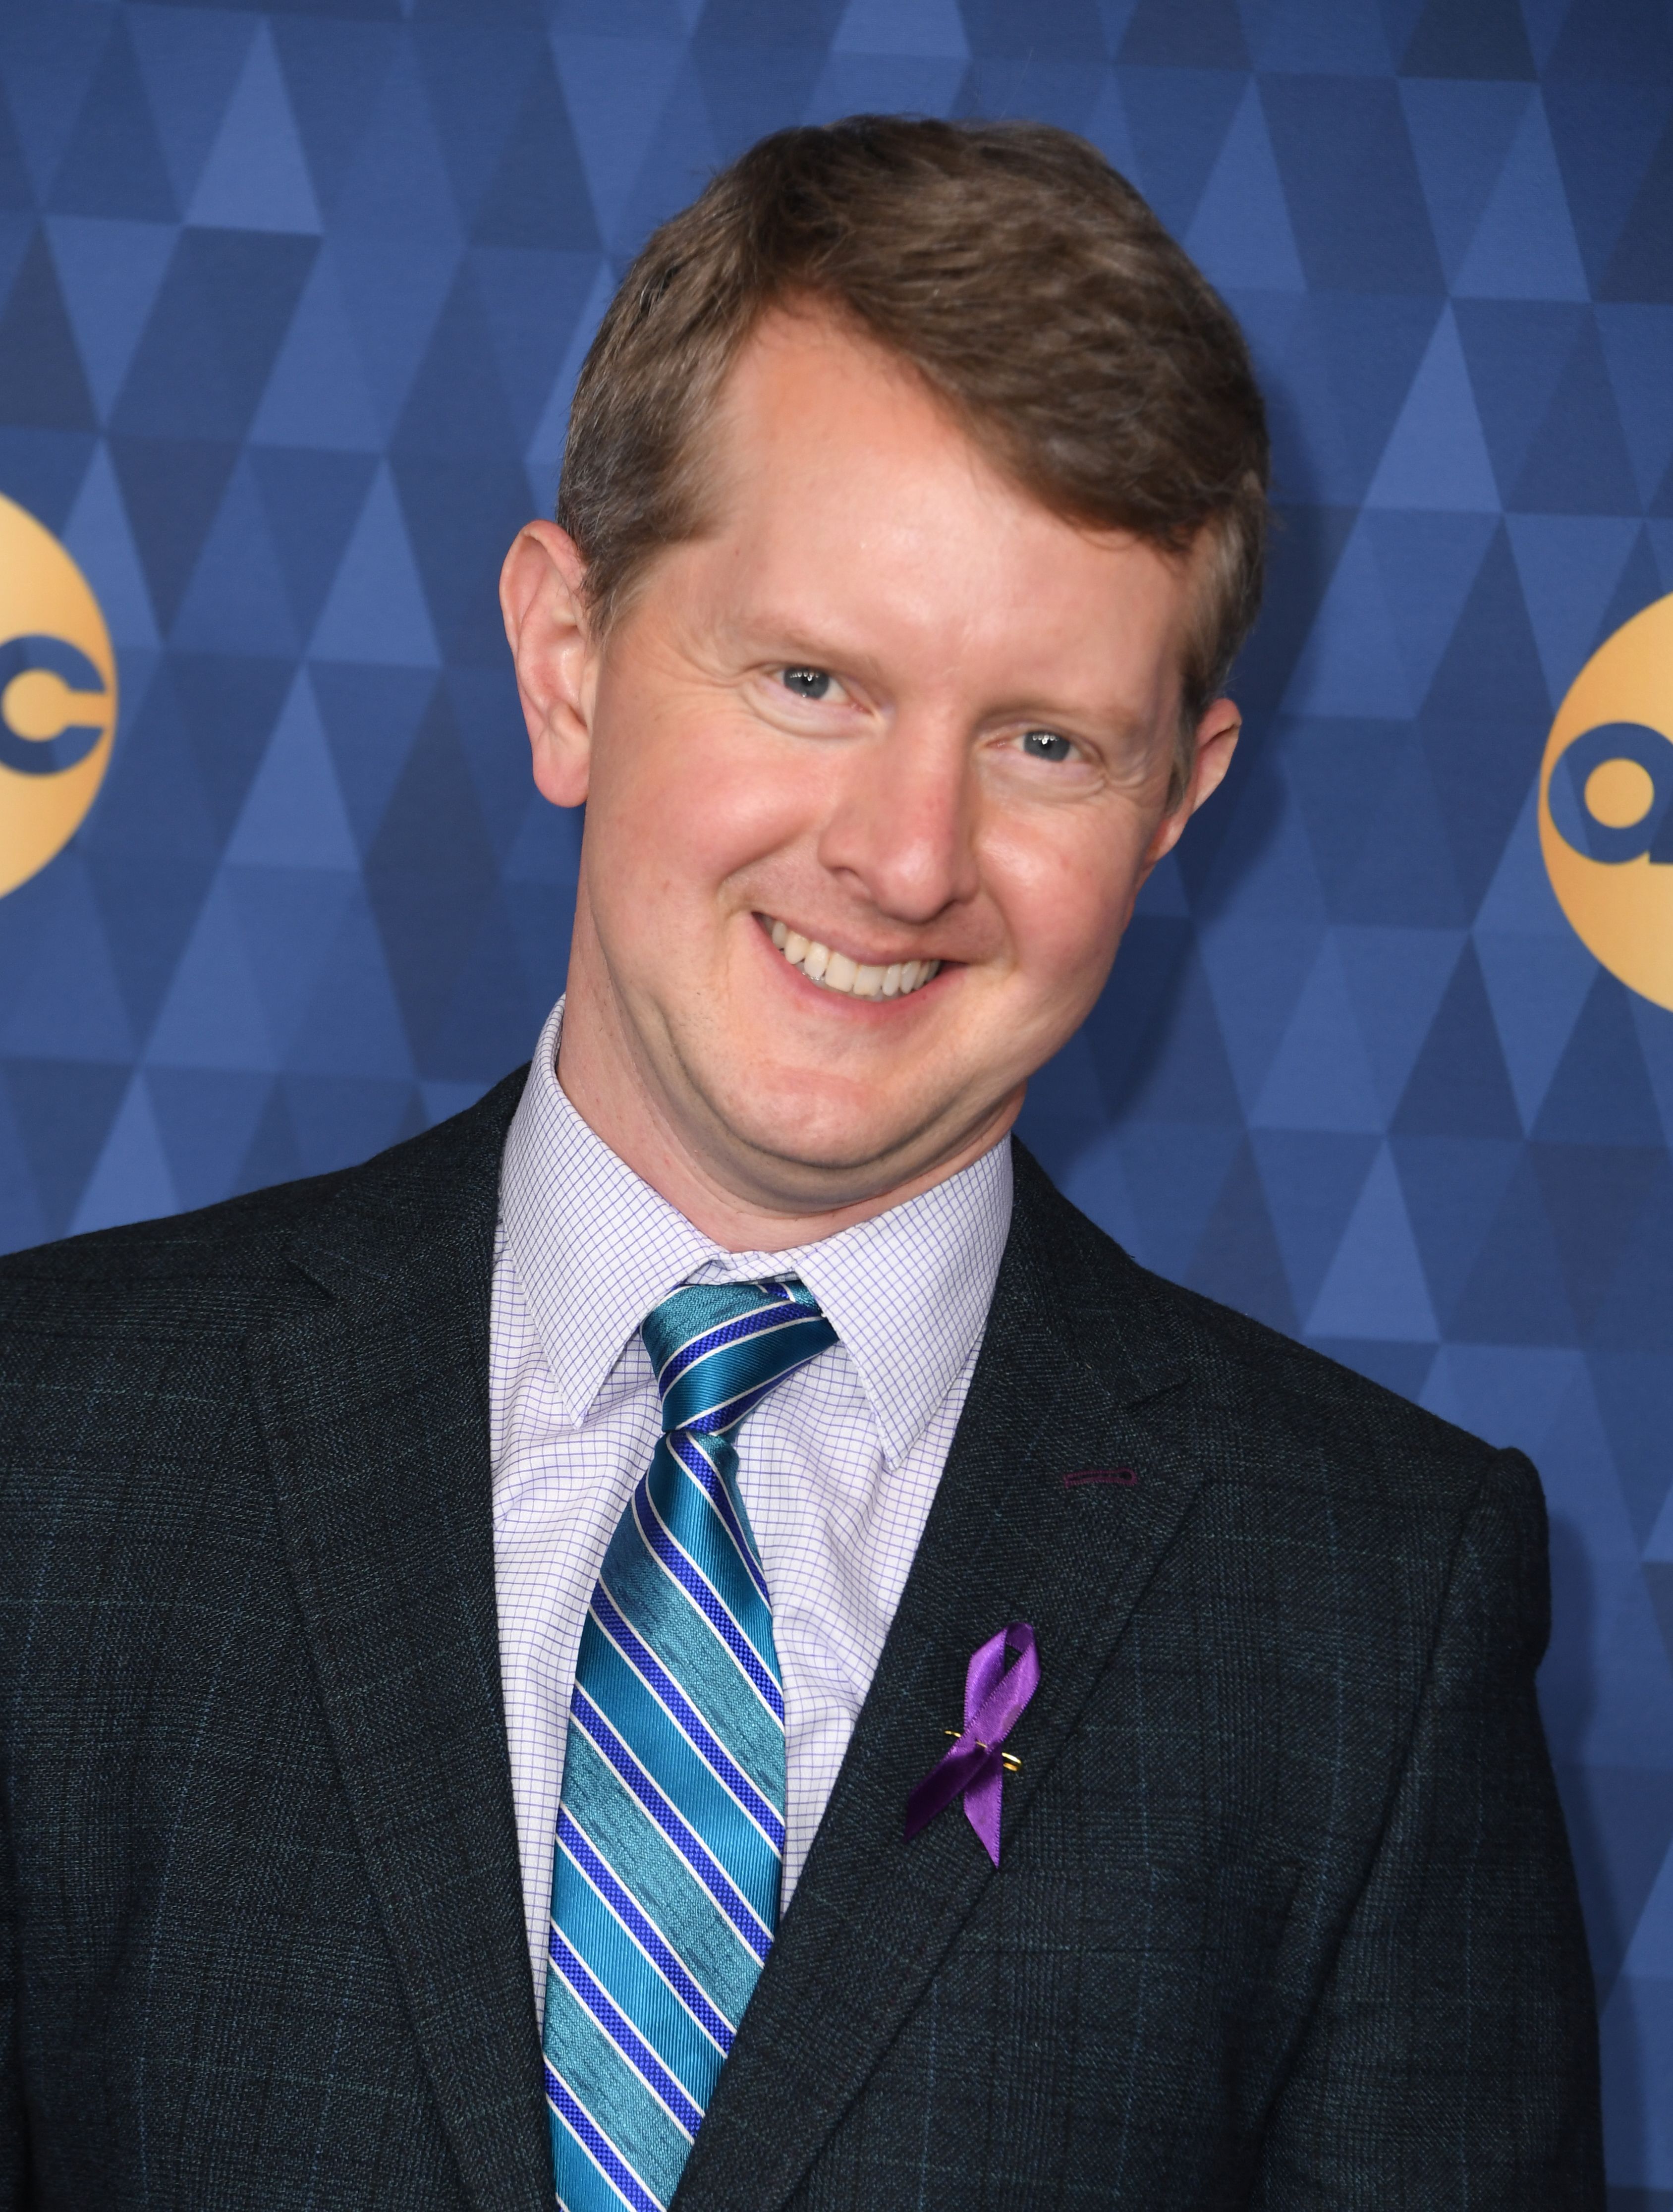 Ken Jennings attends the 2020 ABC Winter TCA Press Tour on January 8, 2020 in Pasadena, California.  |  Source: Getty Images